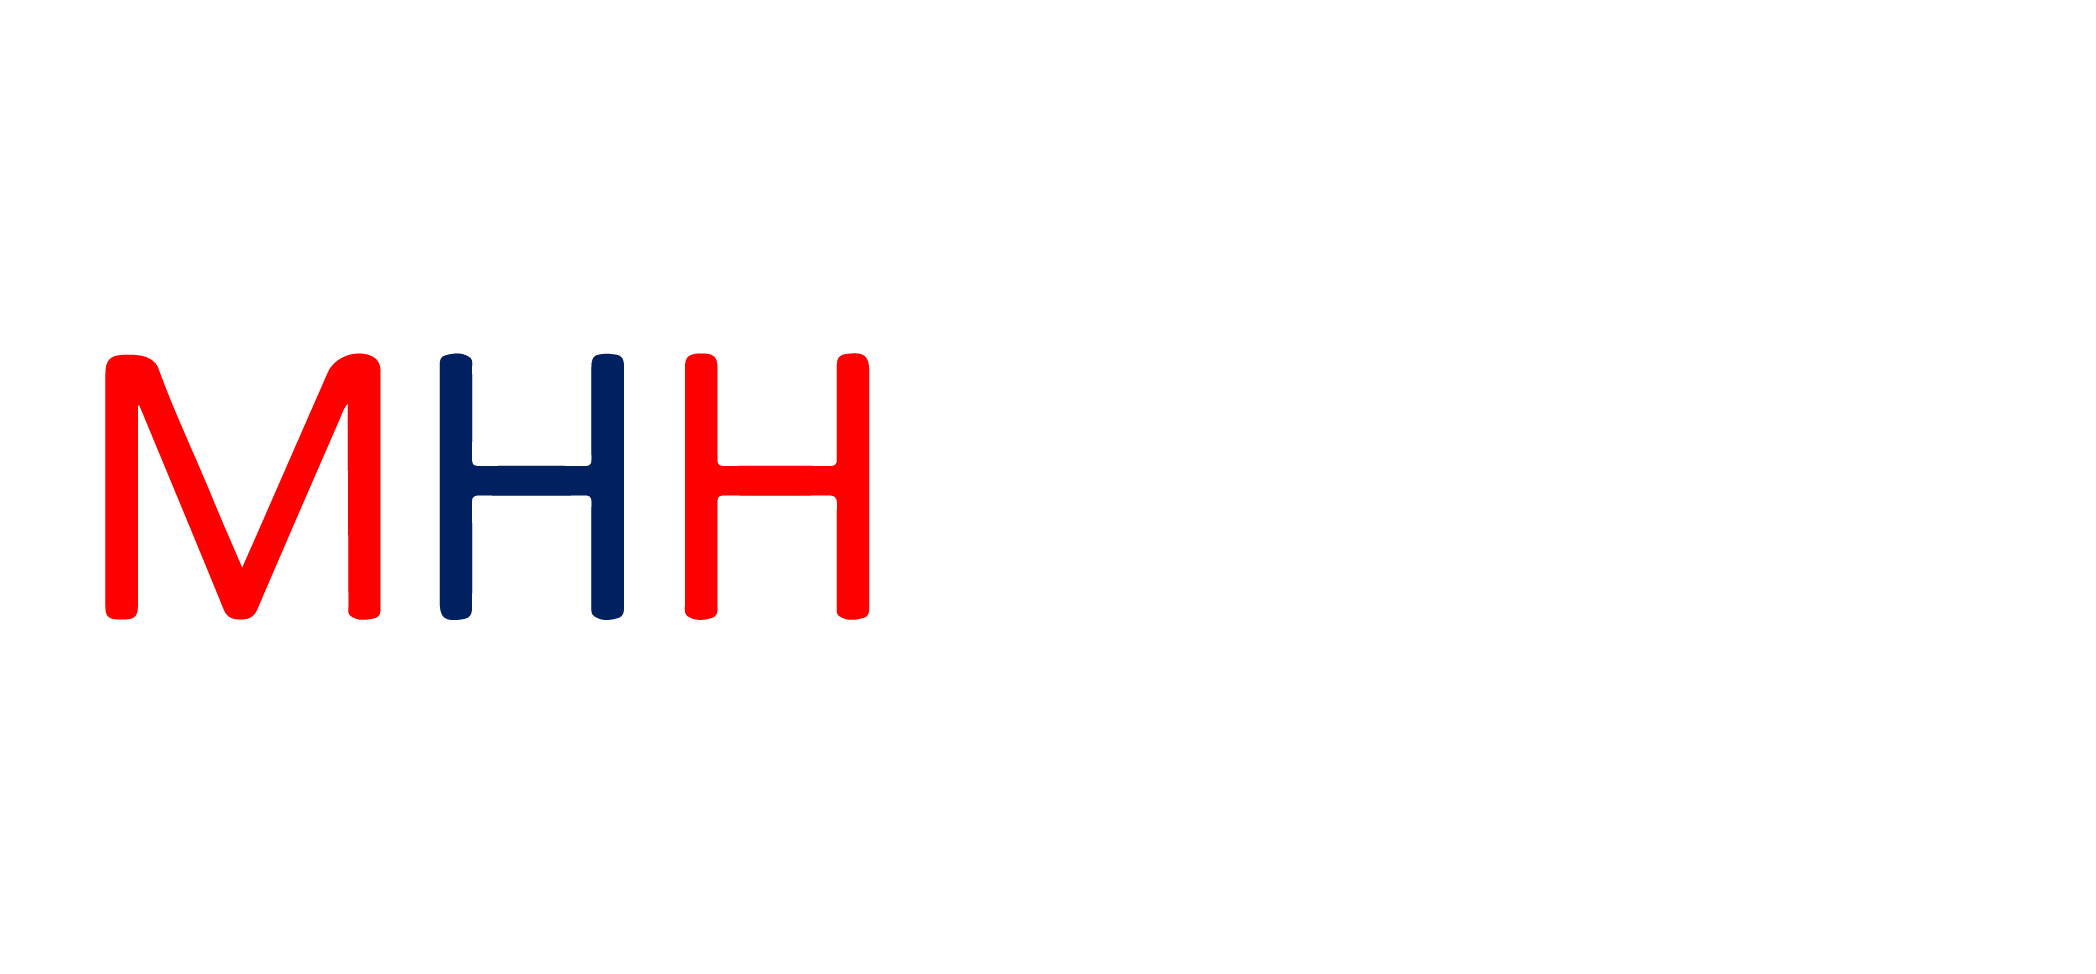 MHH Condition Monitoring